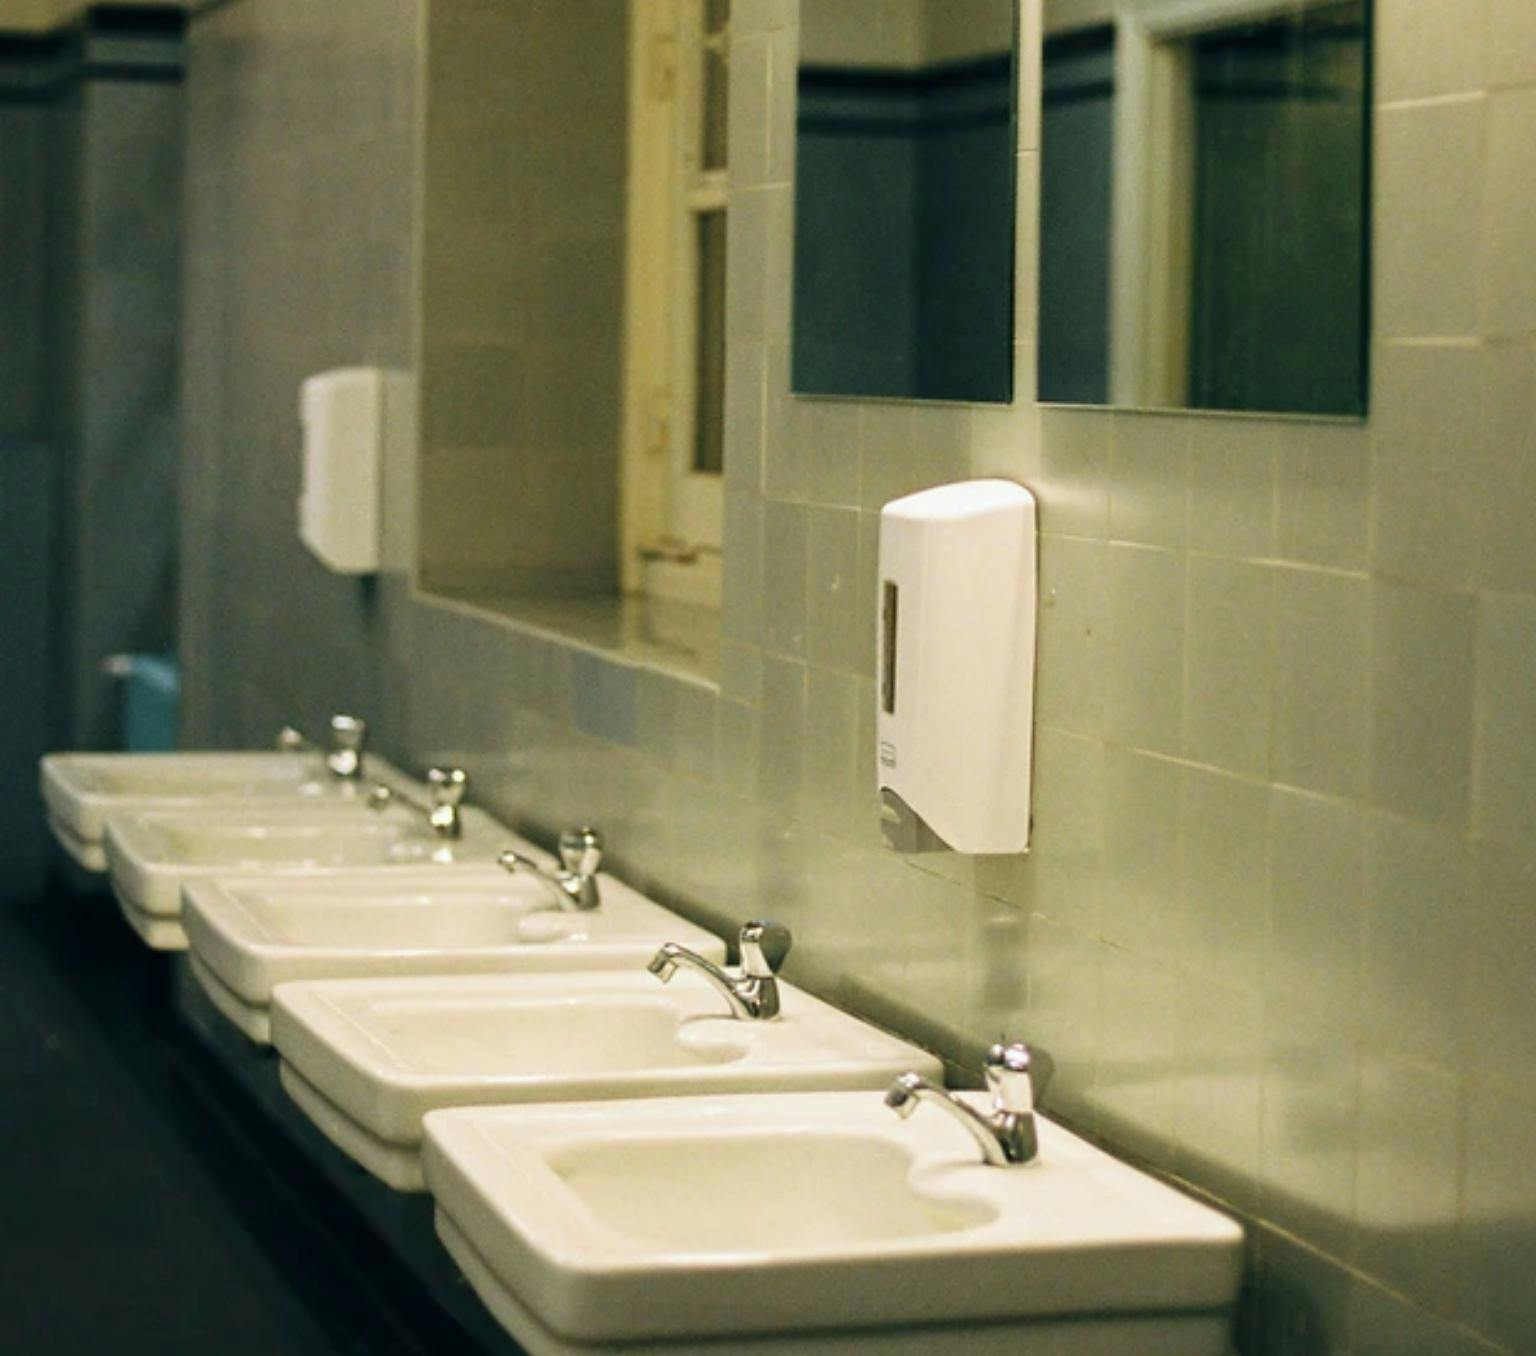 Row of sinks in a public restroom. There are mirrors and hand soap dispensers above the sinks